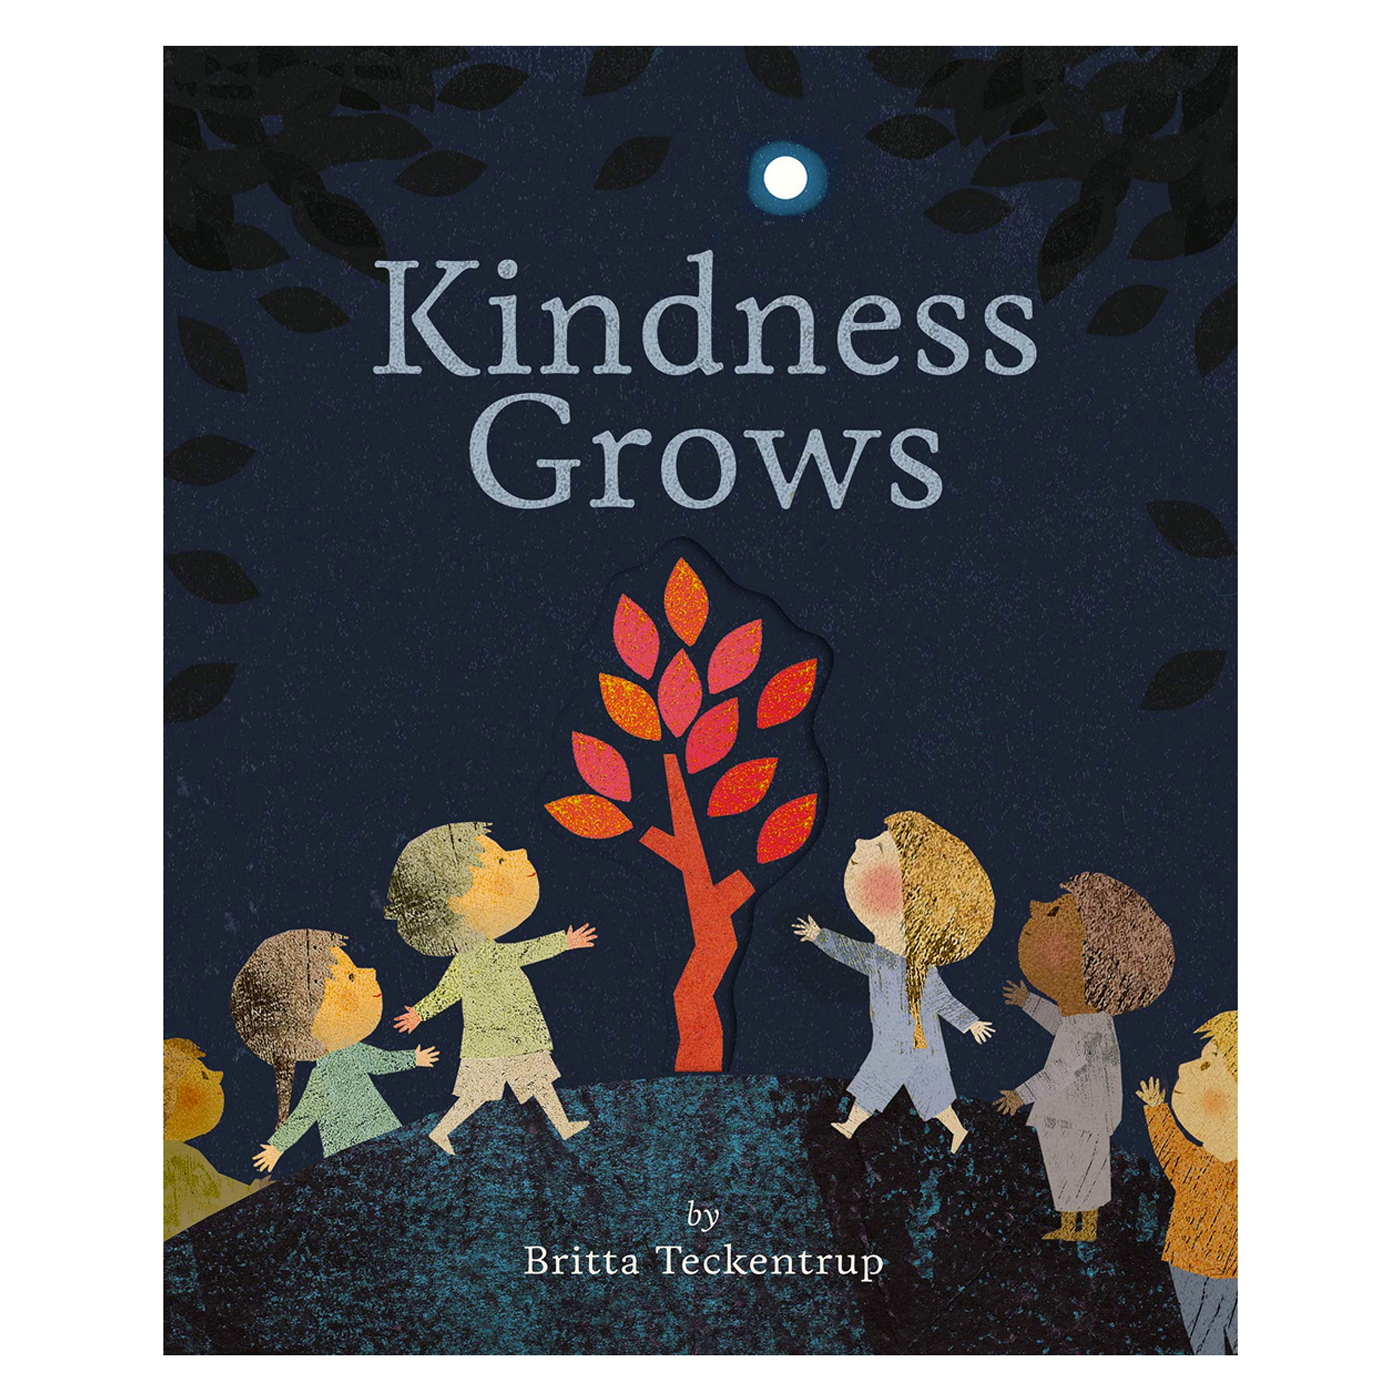  Kindness Grows